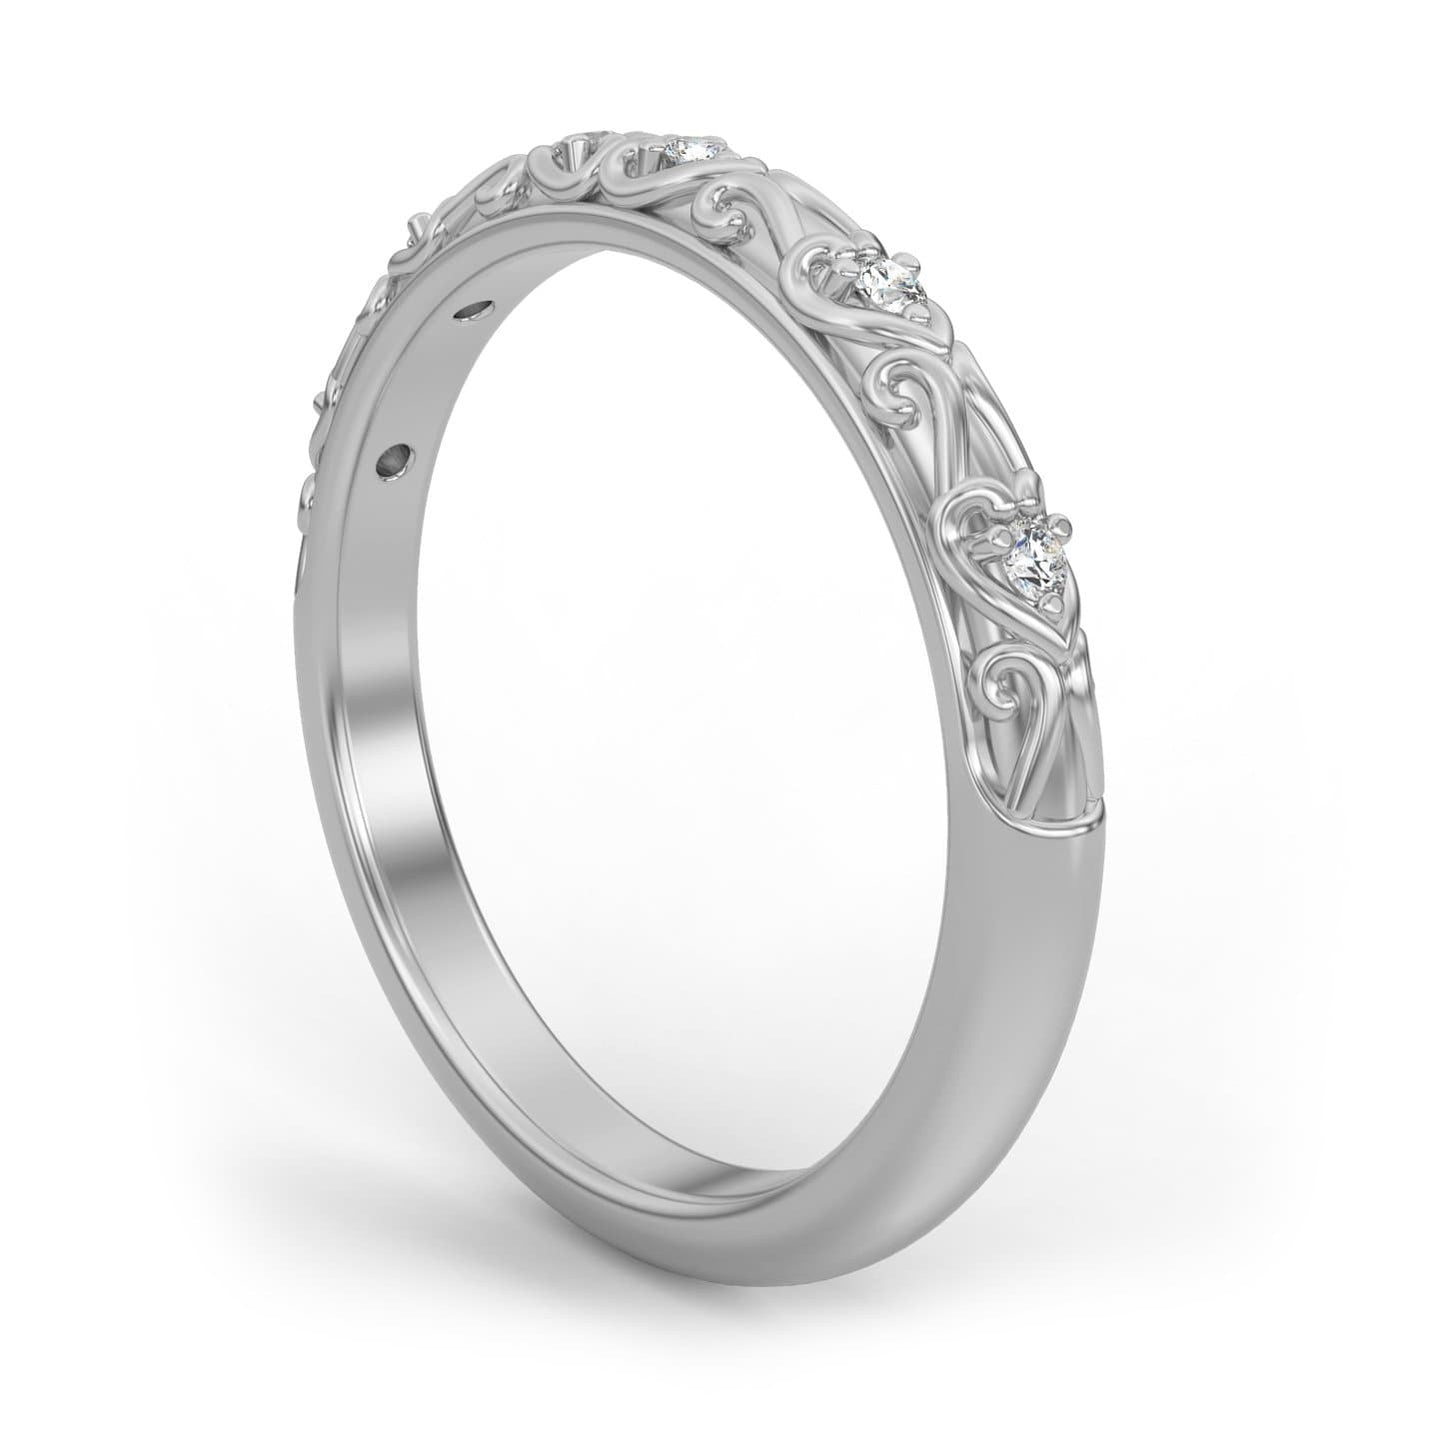 Vineyard Carved Textured Diamond Ring in 14k Gold